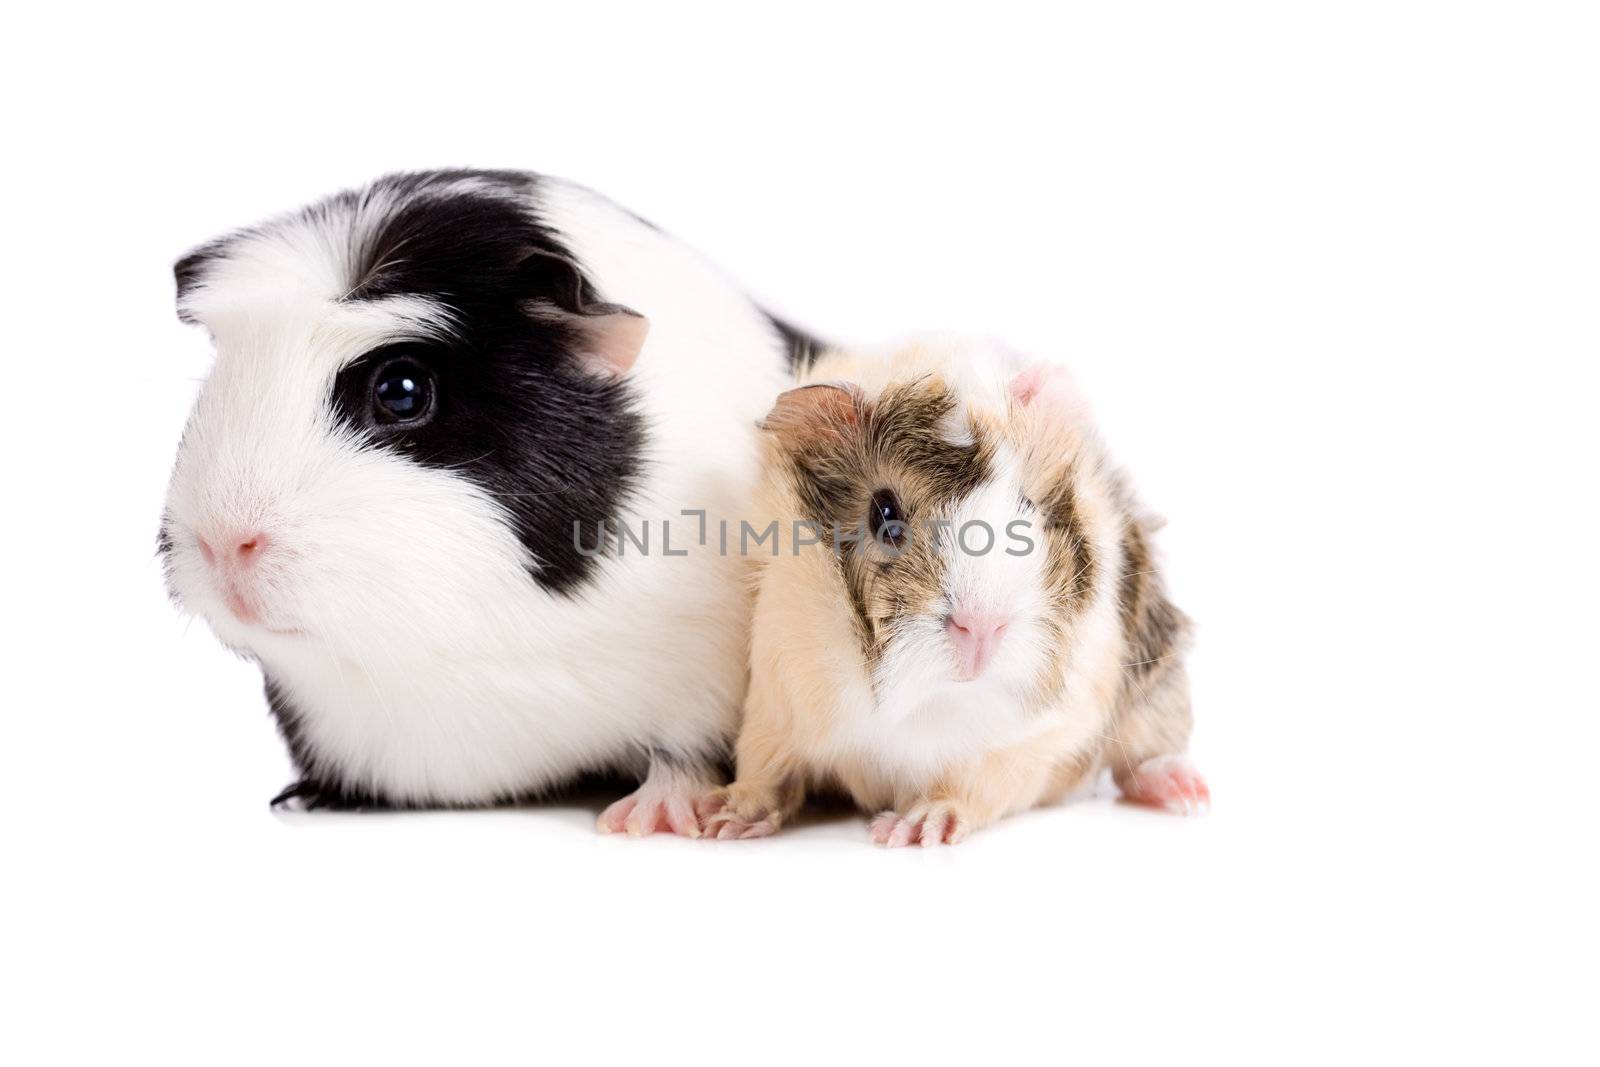 Mother and baby guinea pig sitting together on white